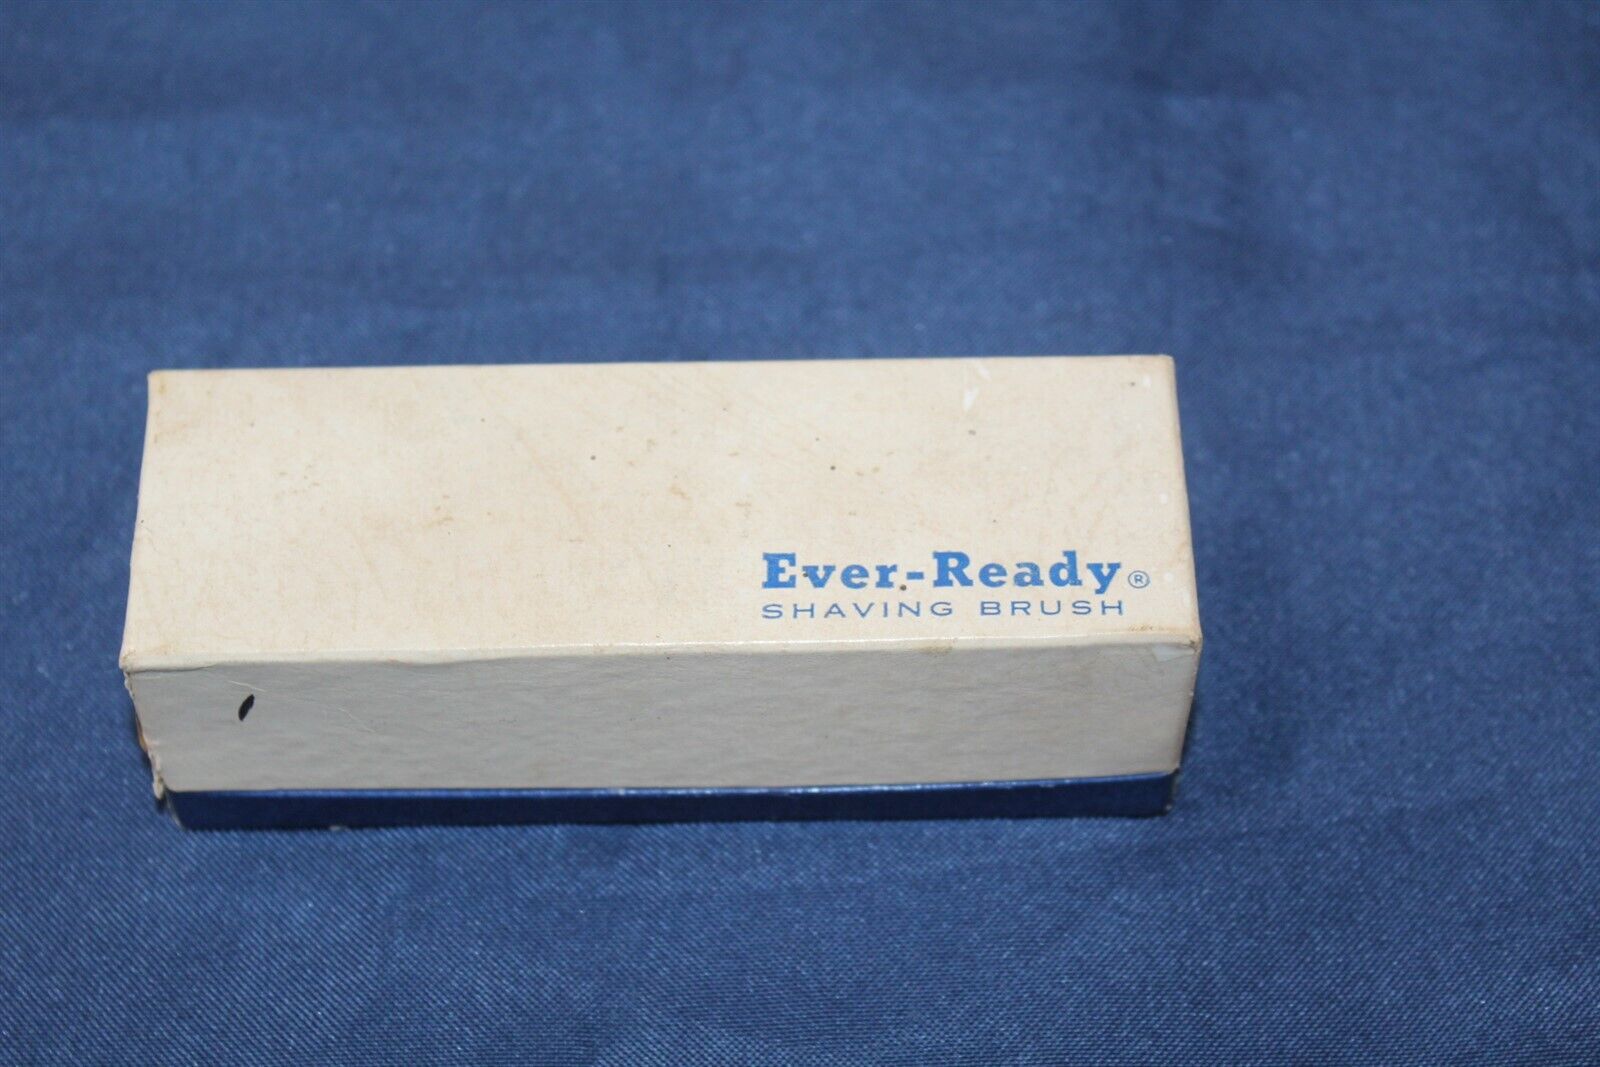  Collectible Empty Box Advertising Ever-Ready Shaving Brush #300 PBT Vintage